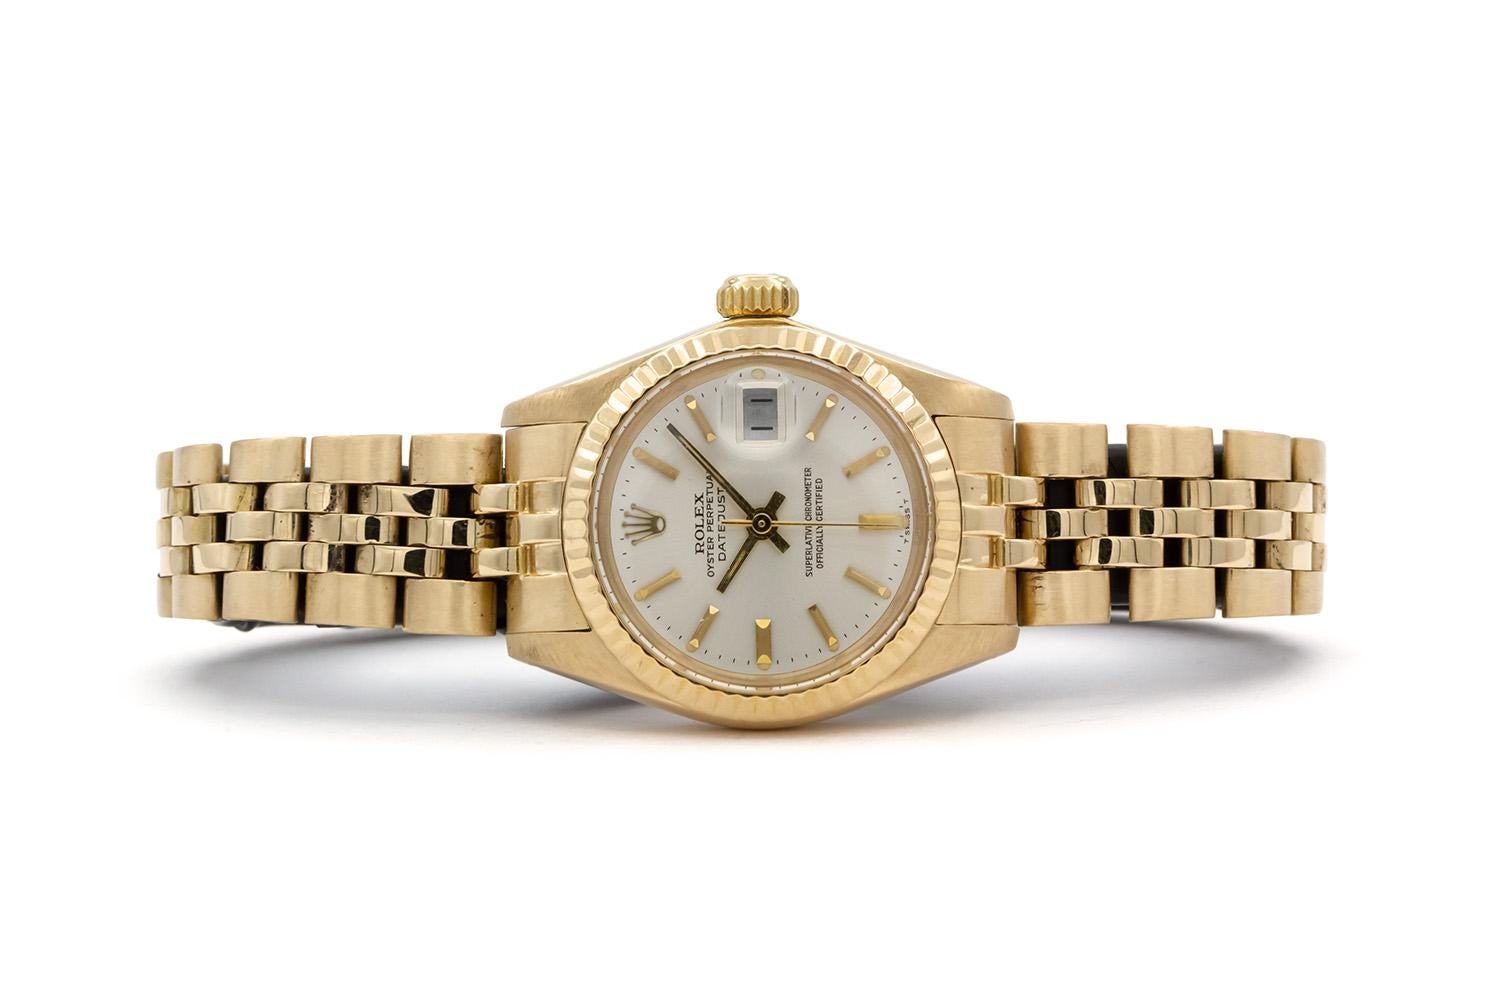 We arepleased to offer this Rare 1979 Rolex Ladies Datejust Solid 18k Yellow Gold 6917. This classic ladies watch features a solid 18k Yellow gold design and timeless look. A vintage ladies Rolex in this condition is hard to find these days. It will